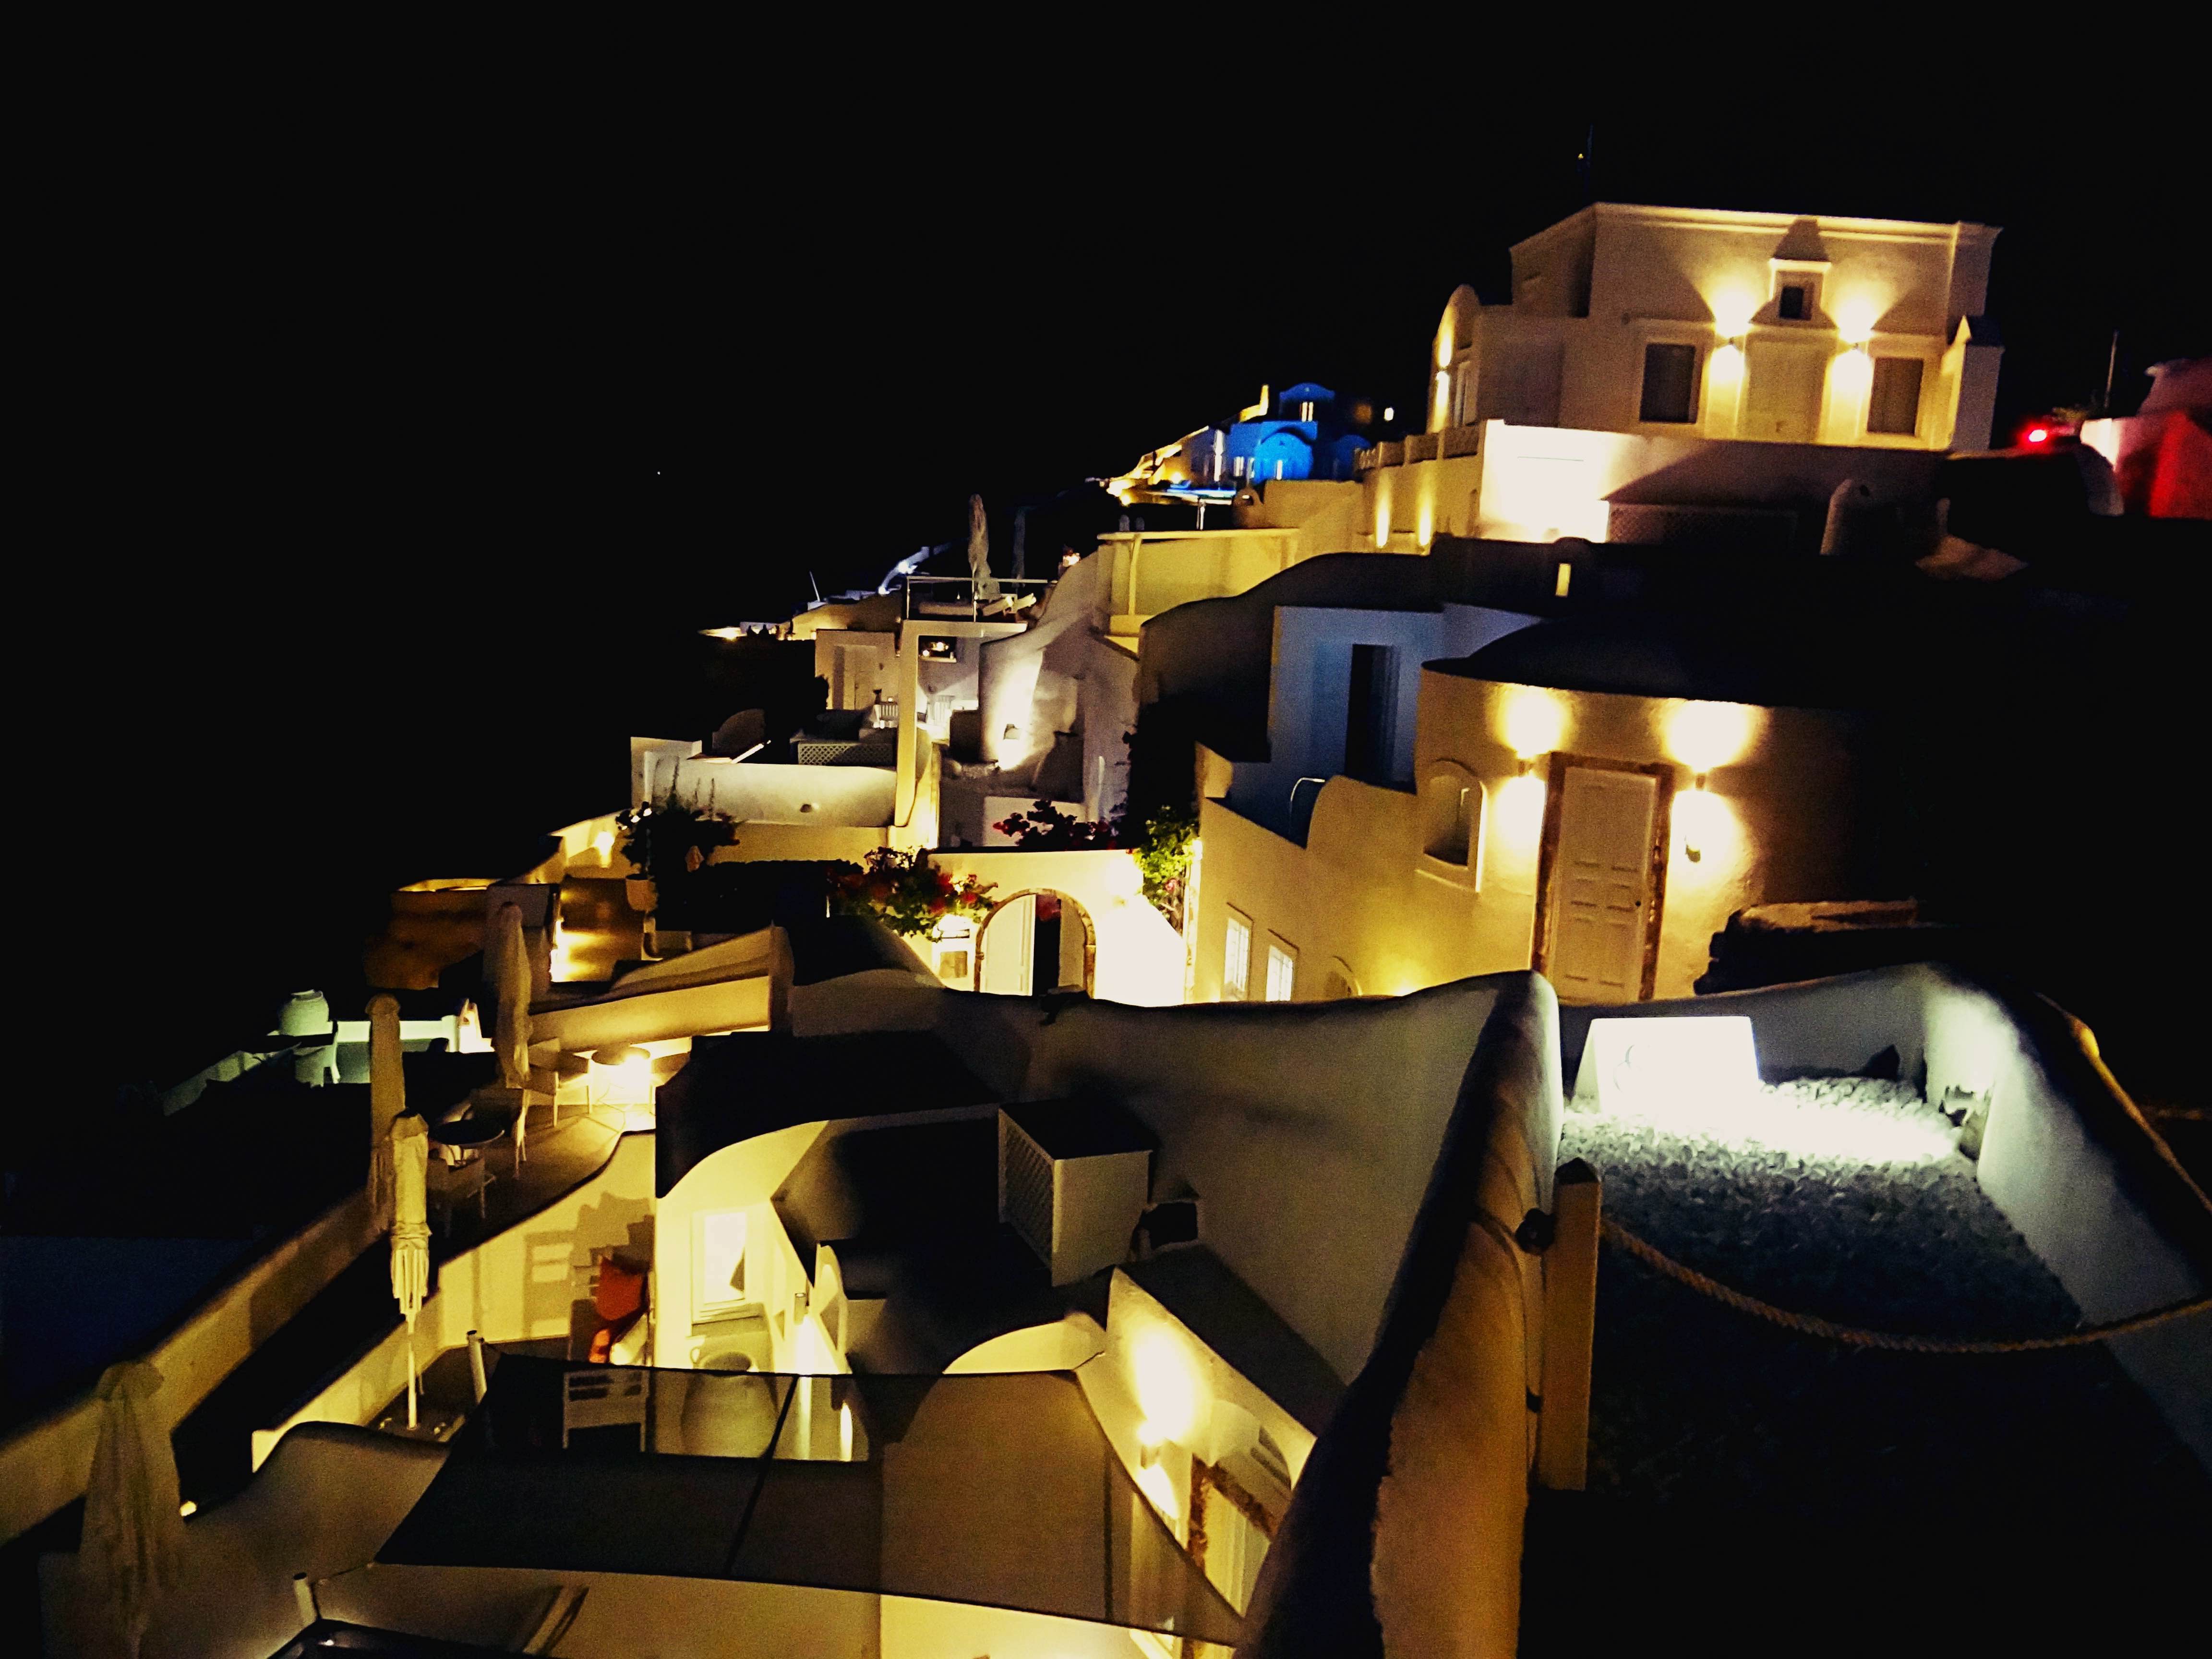 Santorini, I just fell in love with you !